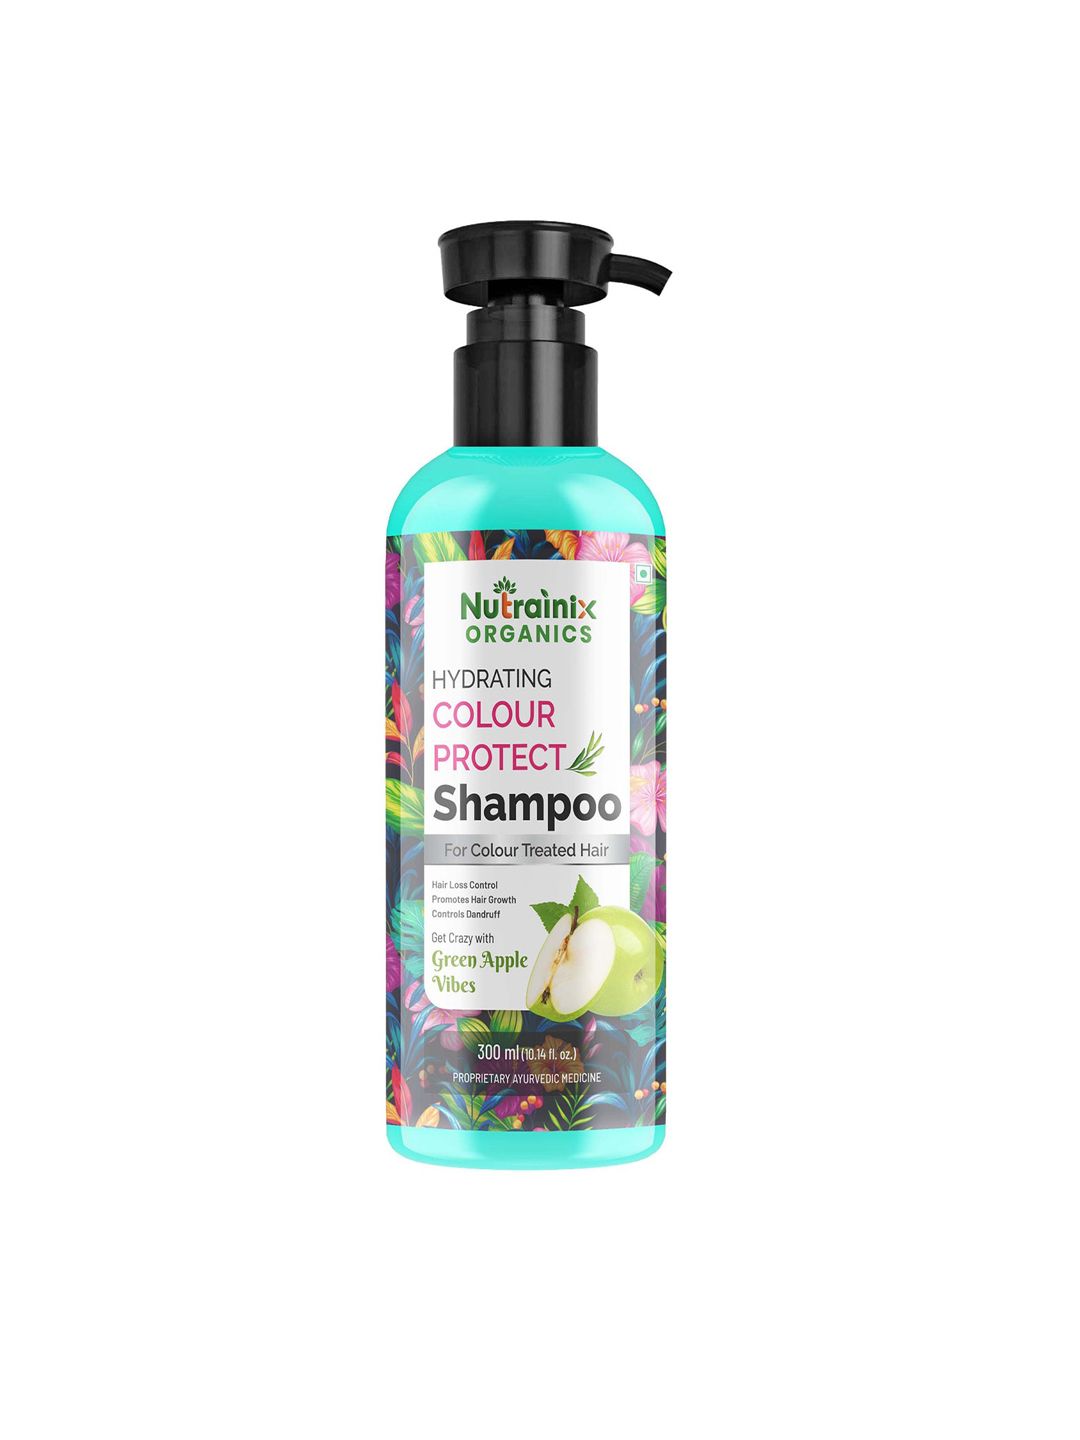 Nutrainix Organics Hydrating Colour Protect Shampoo with Green Apple Vibes - 300 ml Price in India